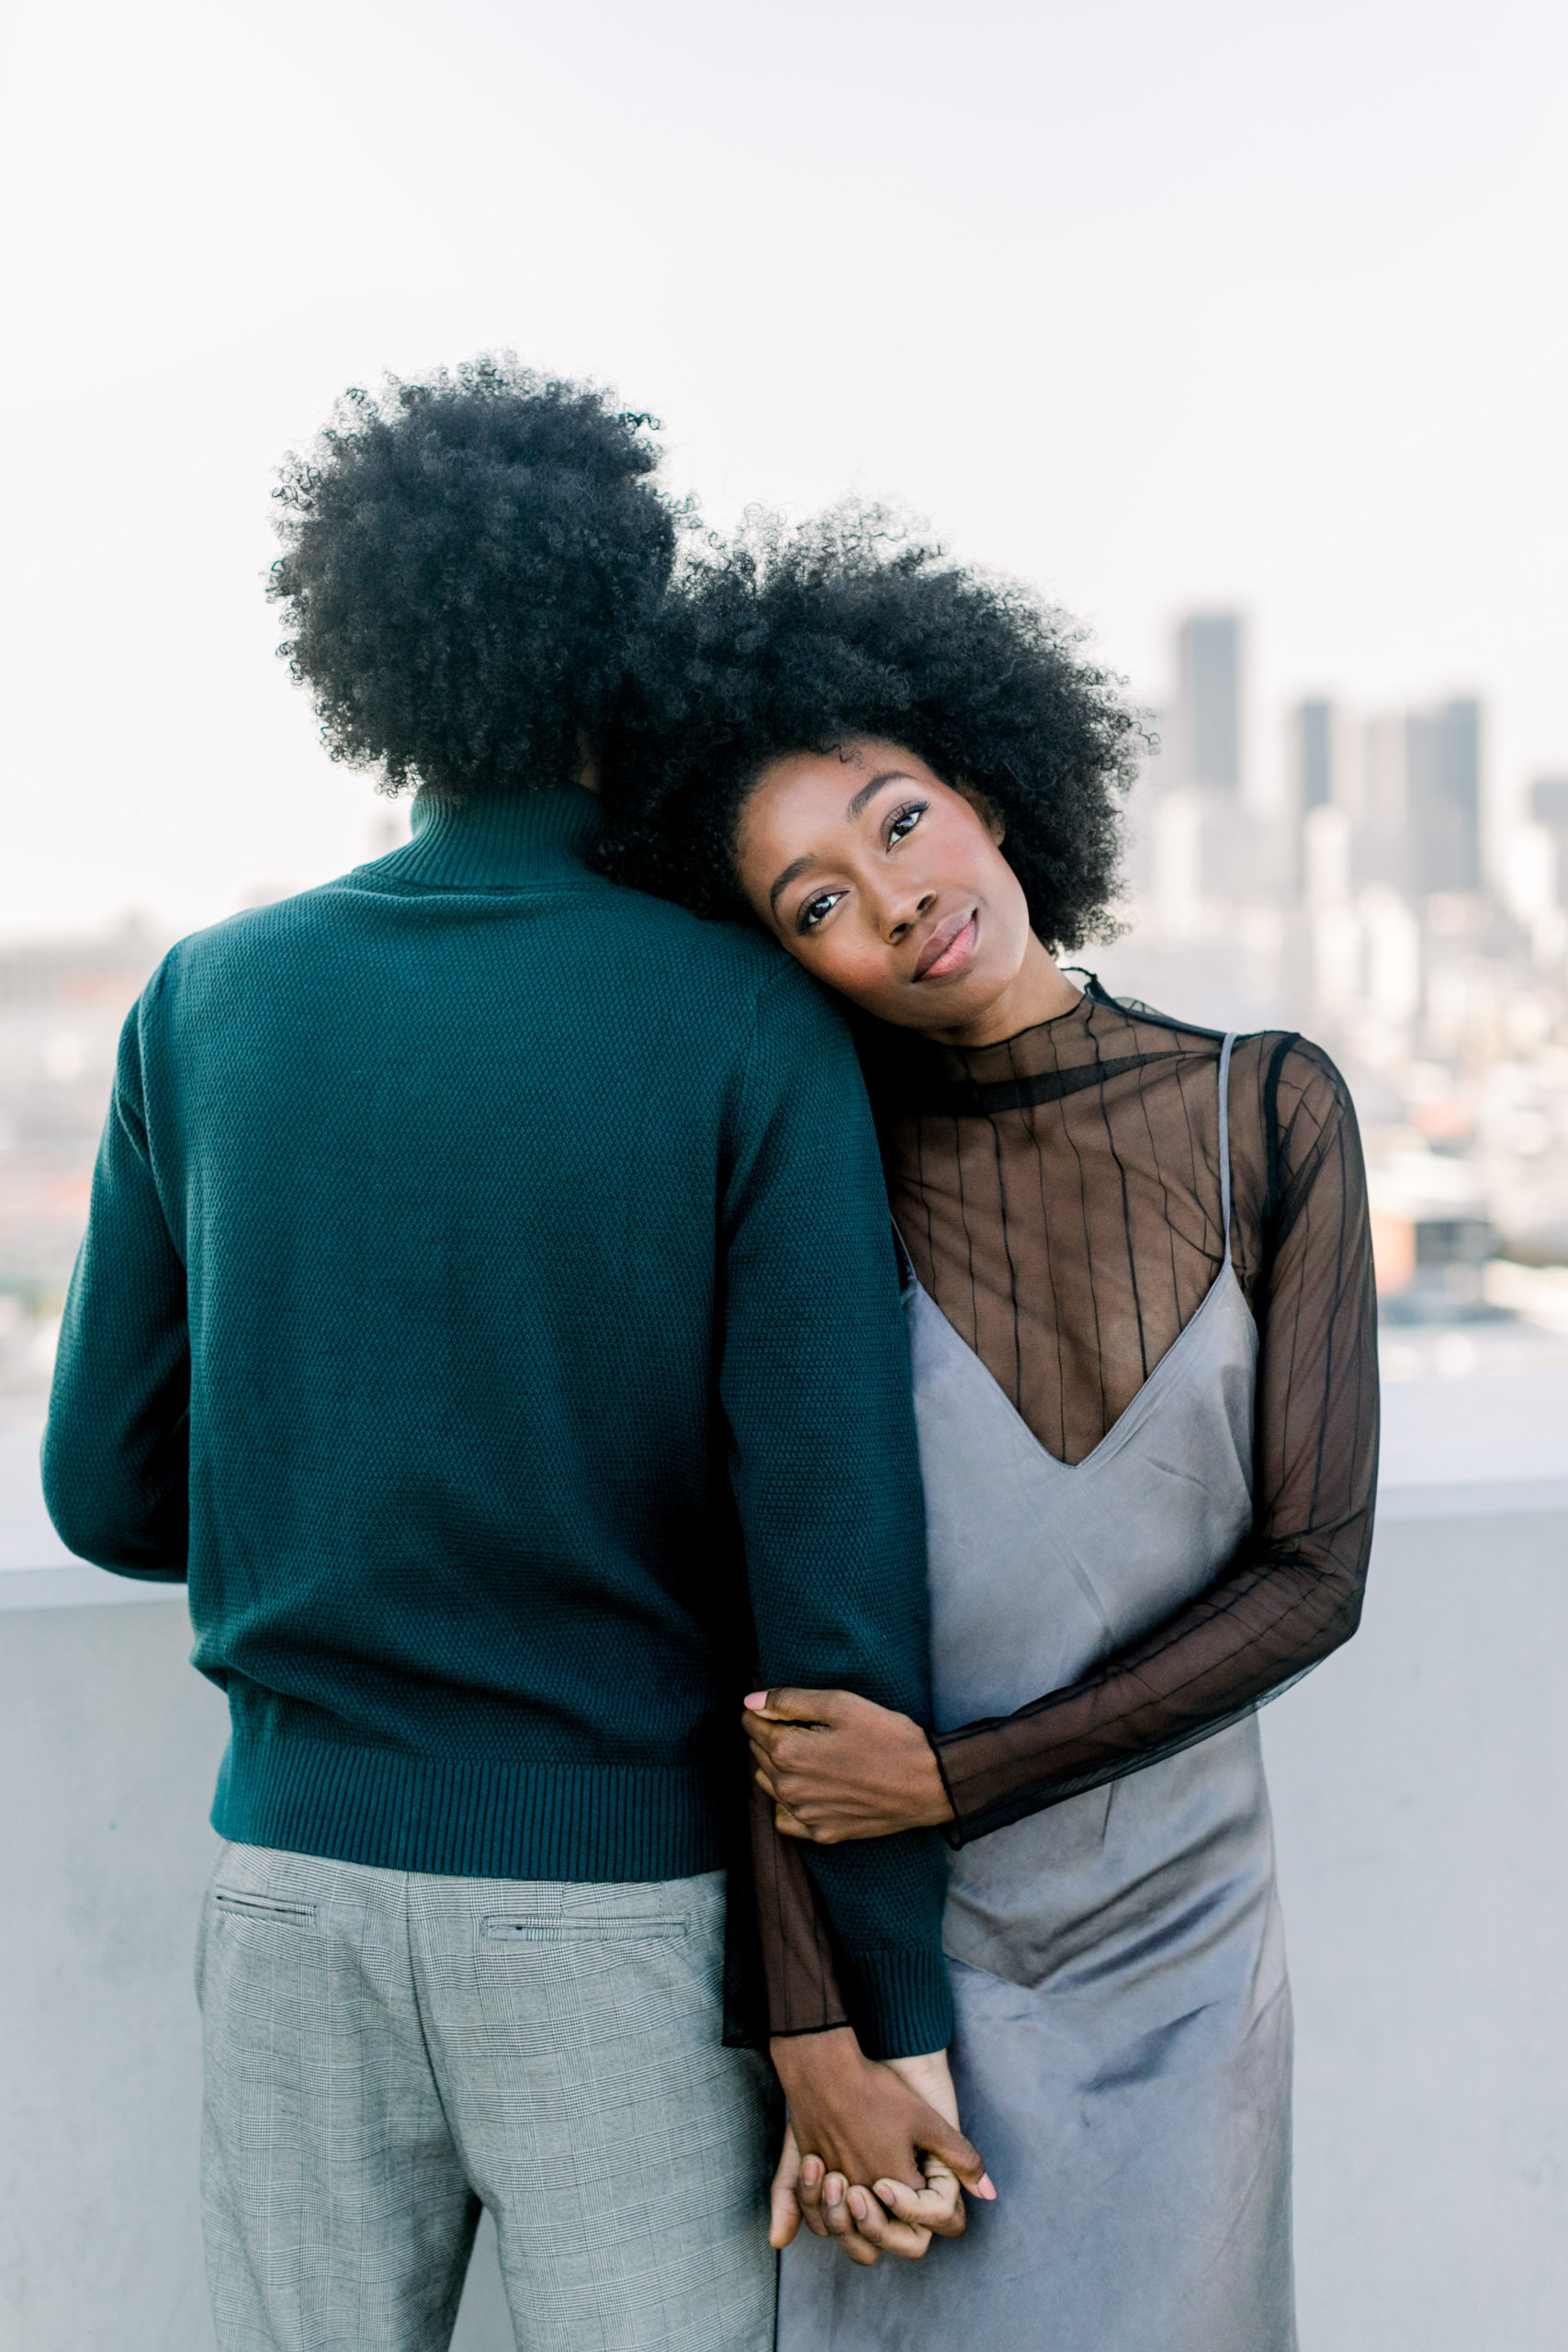 DTLA Engagement Session at The Row